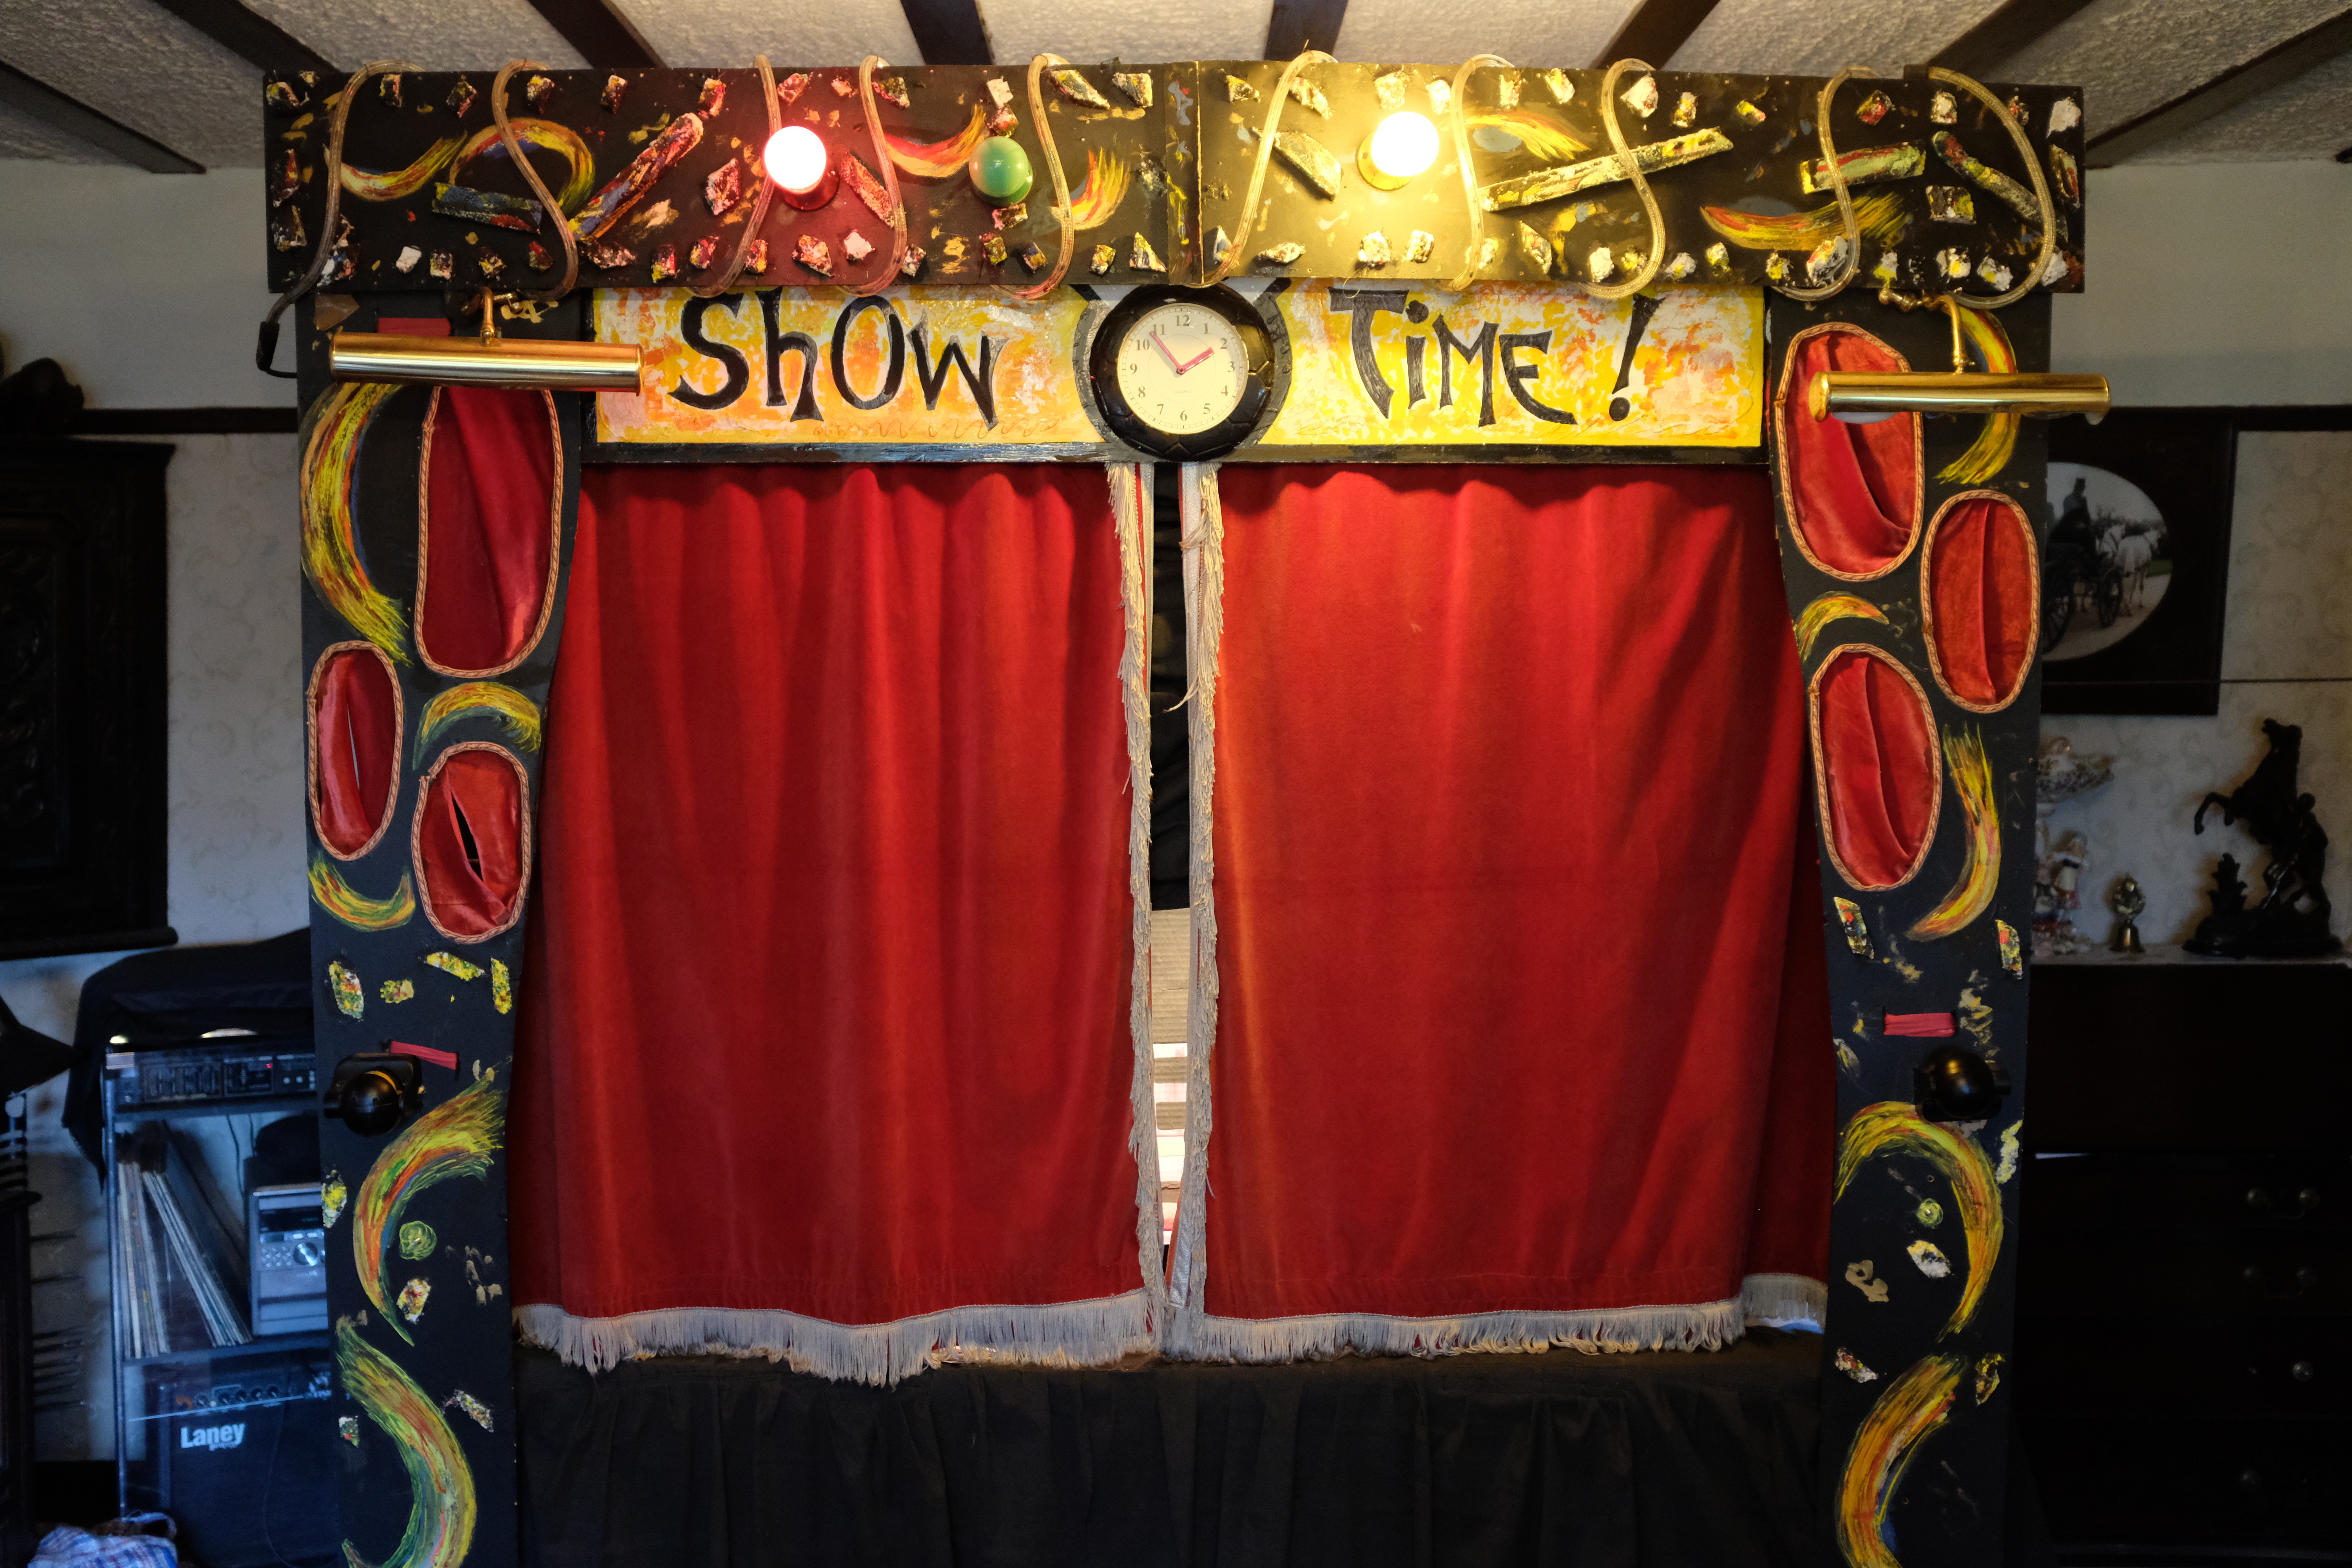 Stage - A large stage set up, ideal for larger marionette shows.